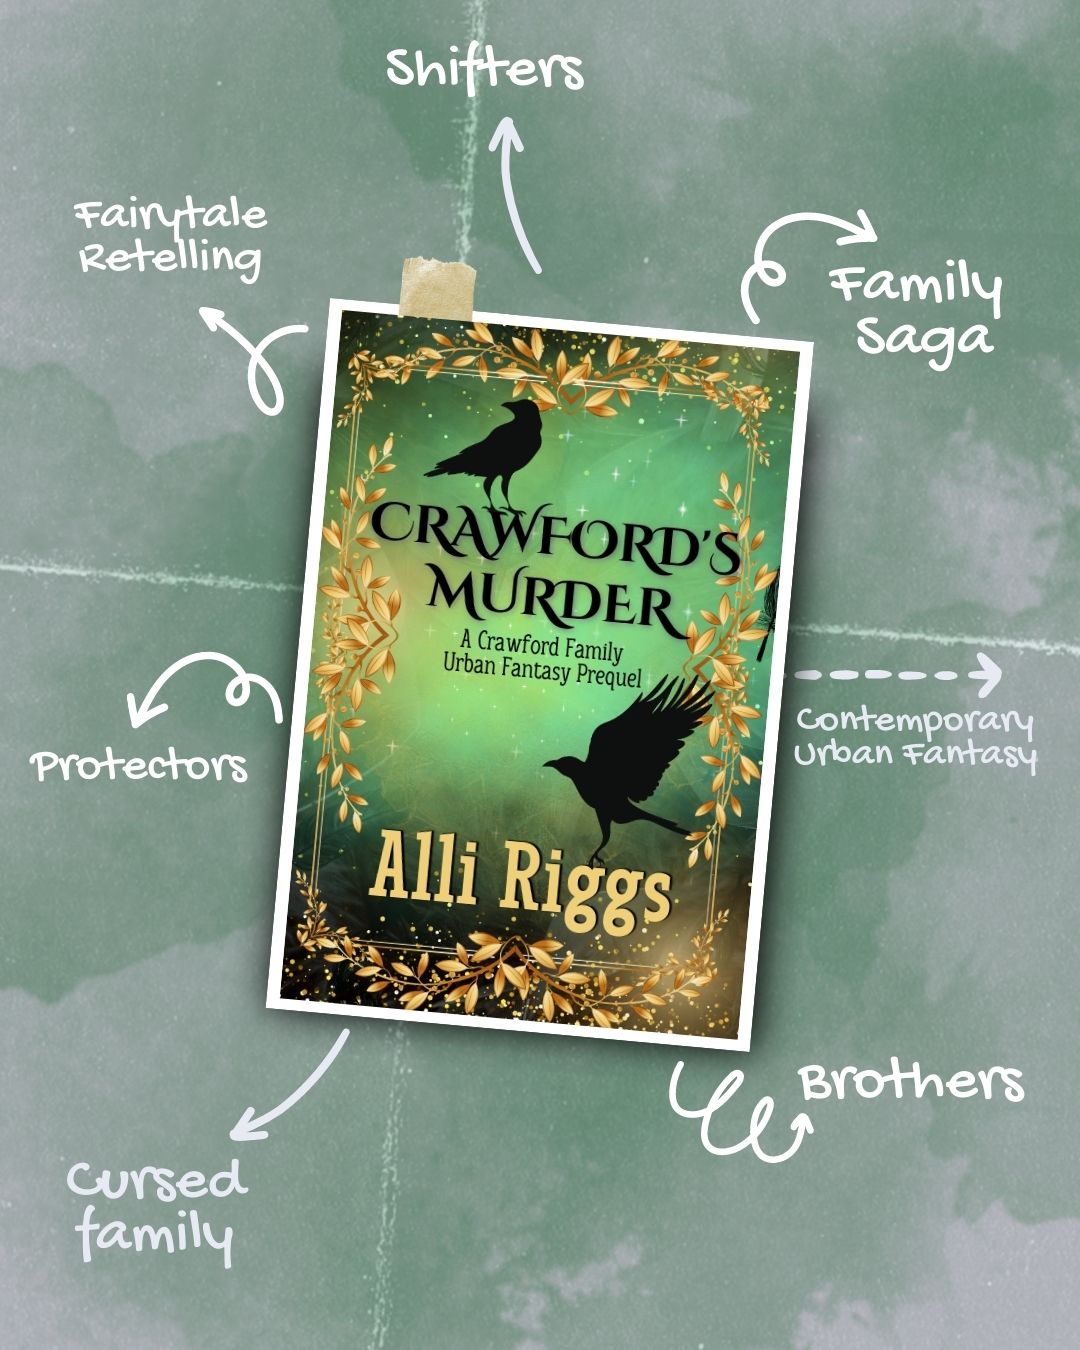 Crawford's Murder: and urban fantasy fairy tale retelling of a Grim Fairy Tale: The 12 Brothers.  Tropes include a family saga, contemporary urban fantasy, brothers, cursed family, protectors, shifters, abusive father.